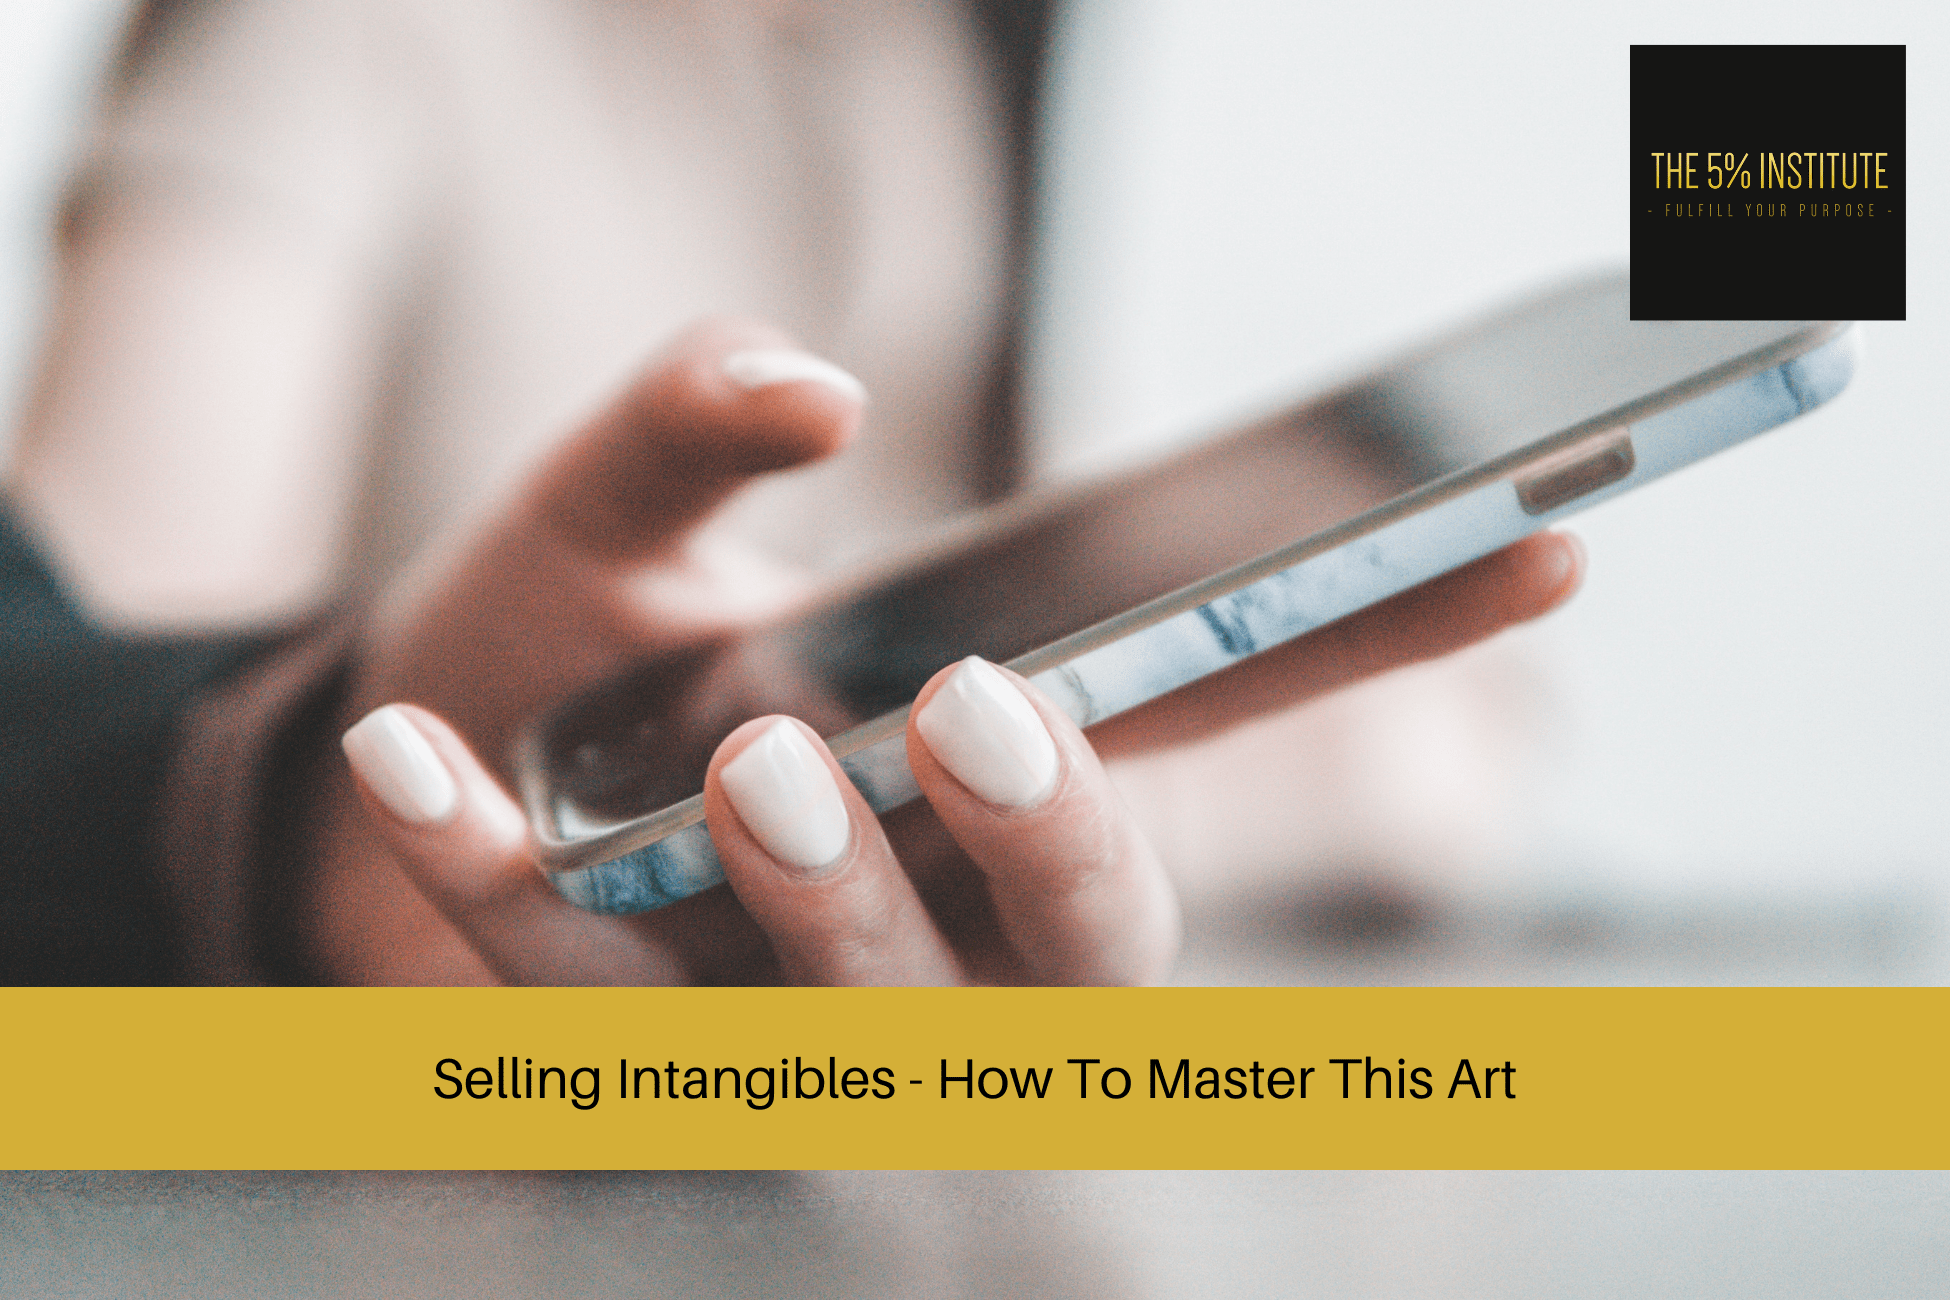 Selling Intangibles - How To Master This Art